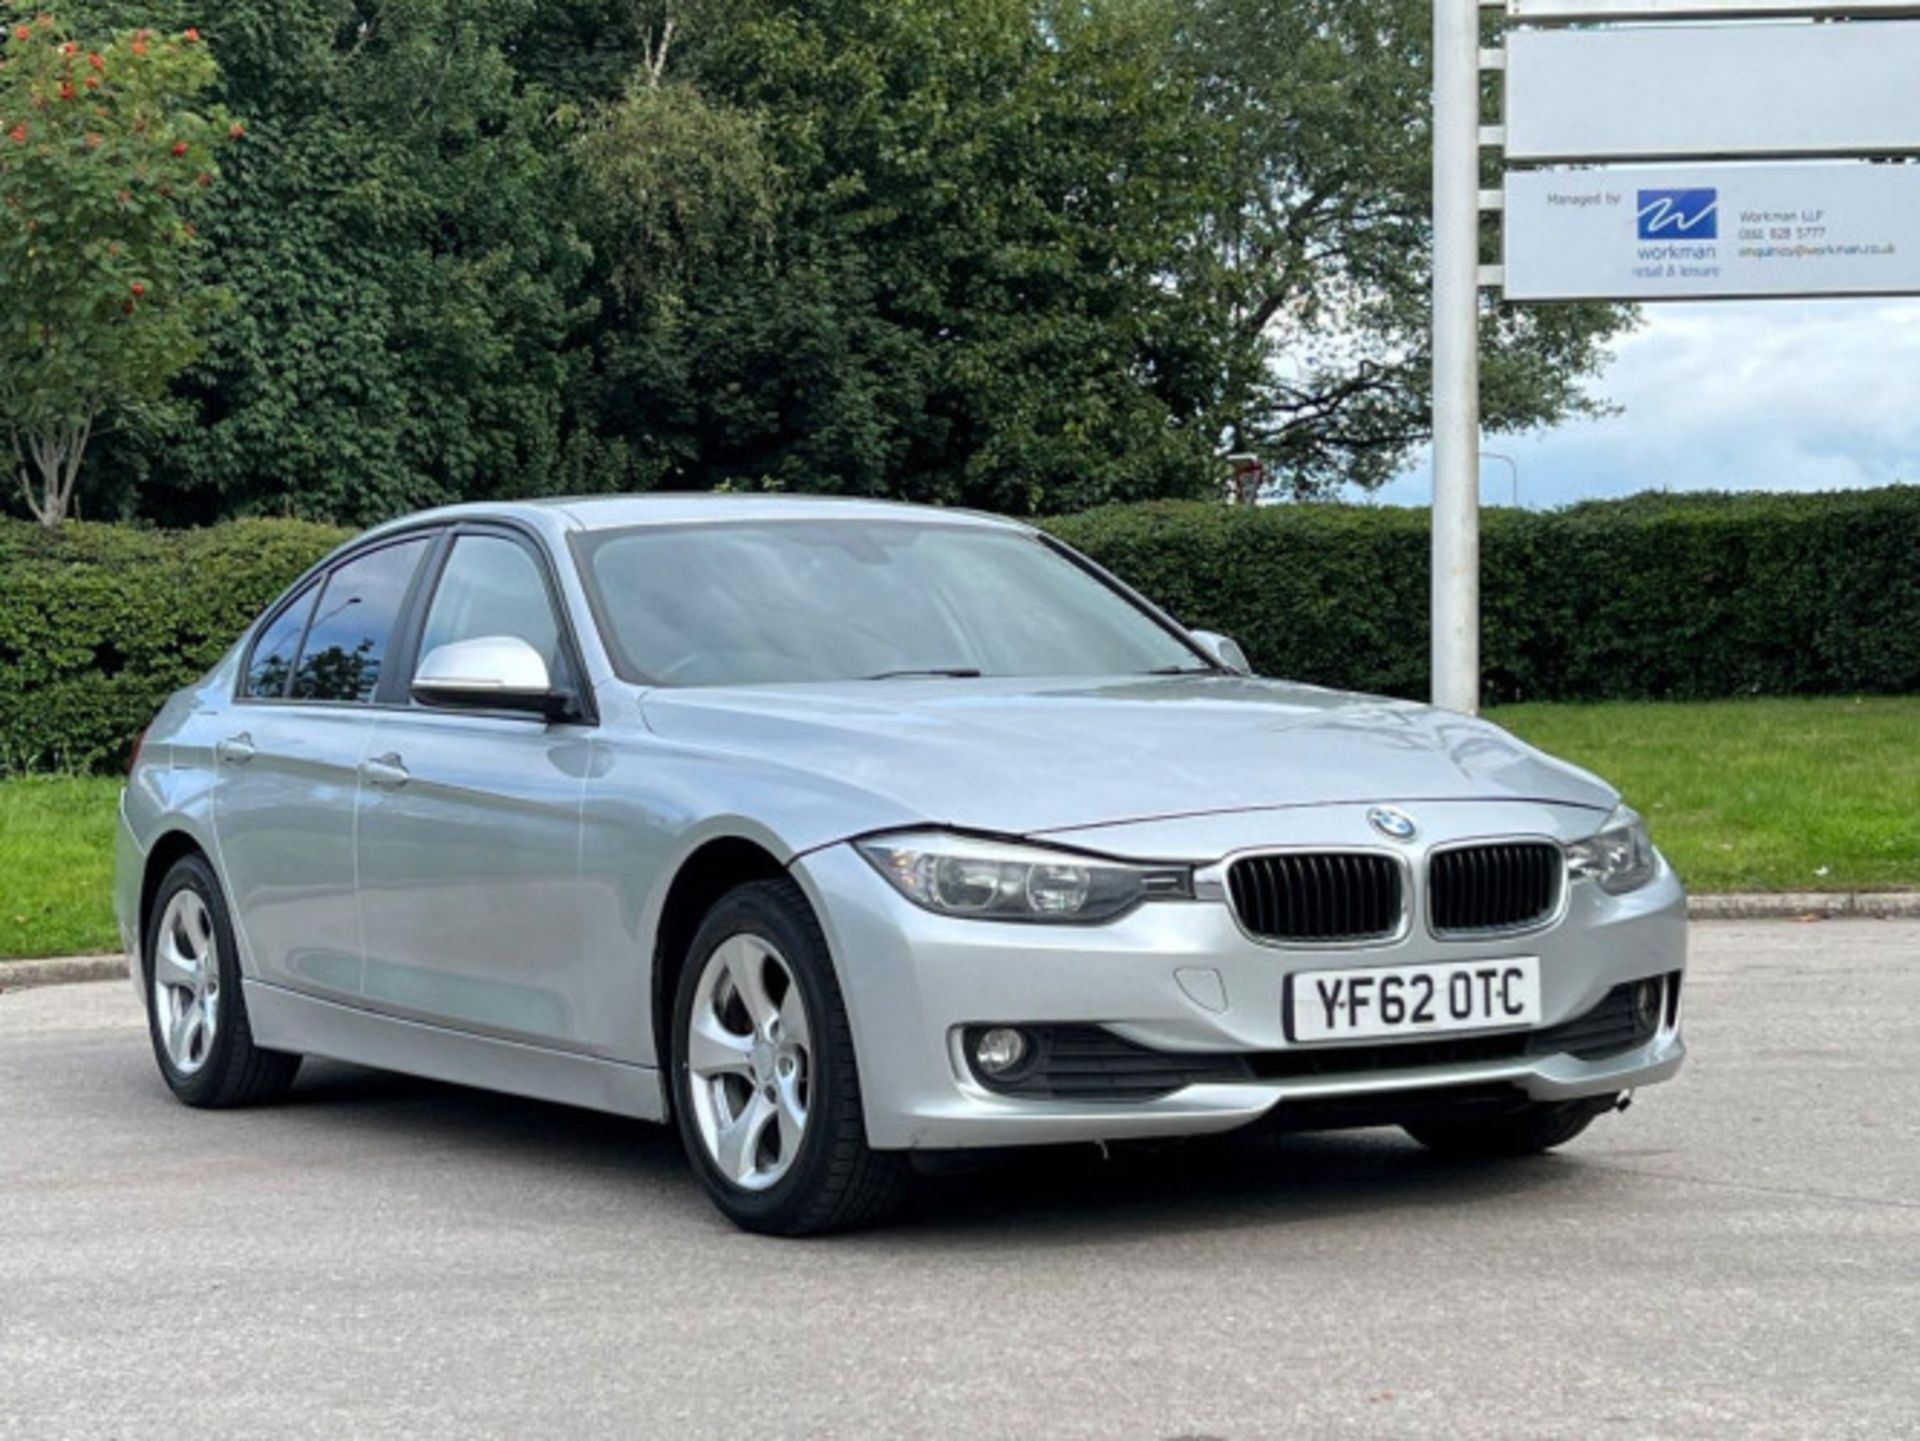 BMW 3 SERIES 2.0 DIESEL ED START STOP - A WELL-MAINTAINED GEM >>--NO VAT ON HAMMER--<<